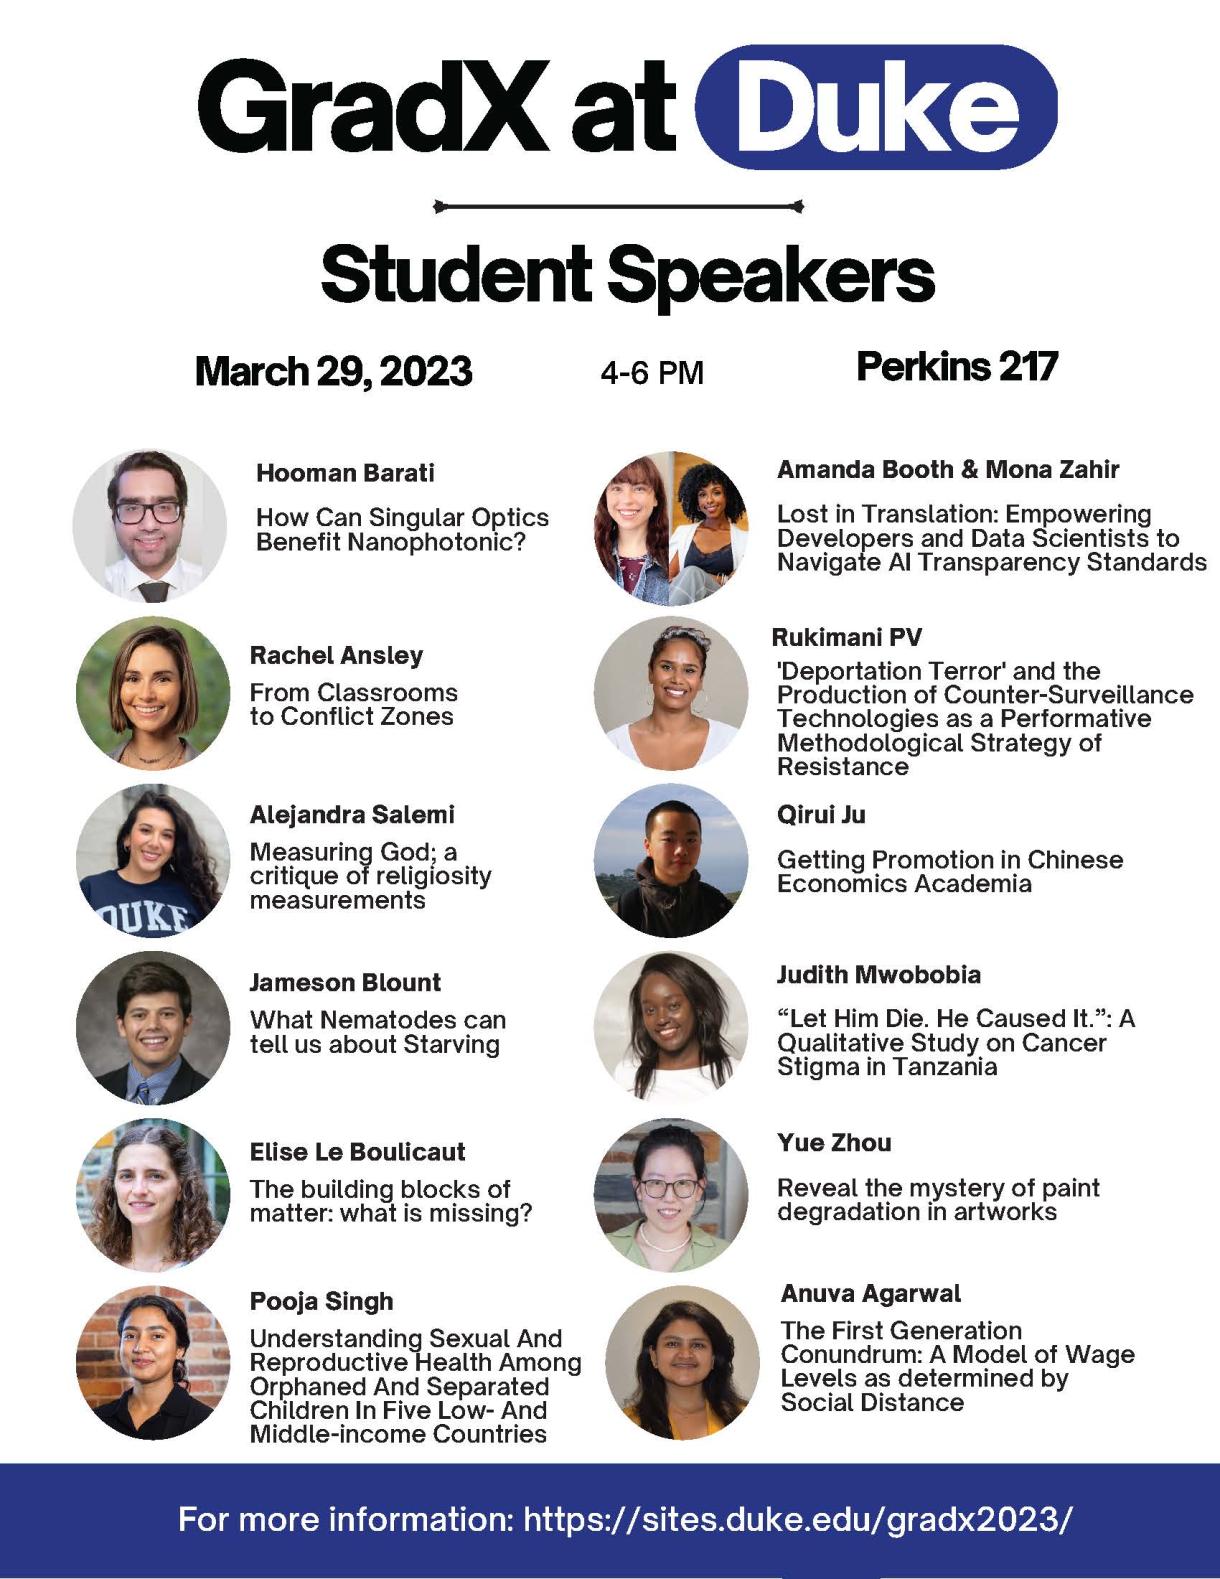 List of 2023 GRADx Student Speakers and Talk Titles